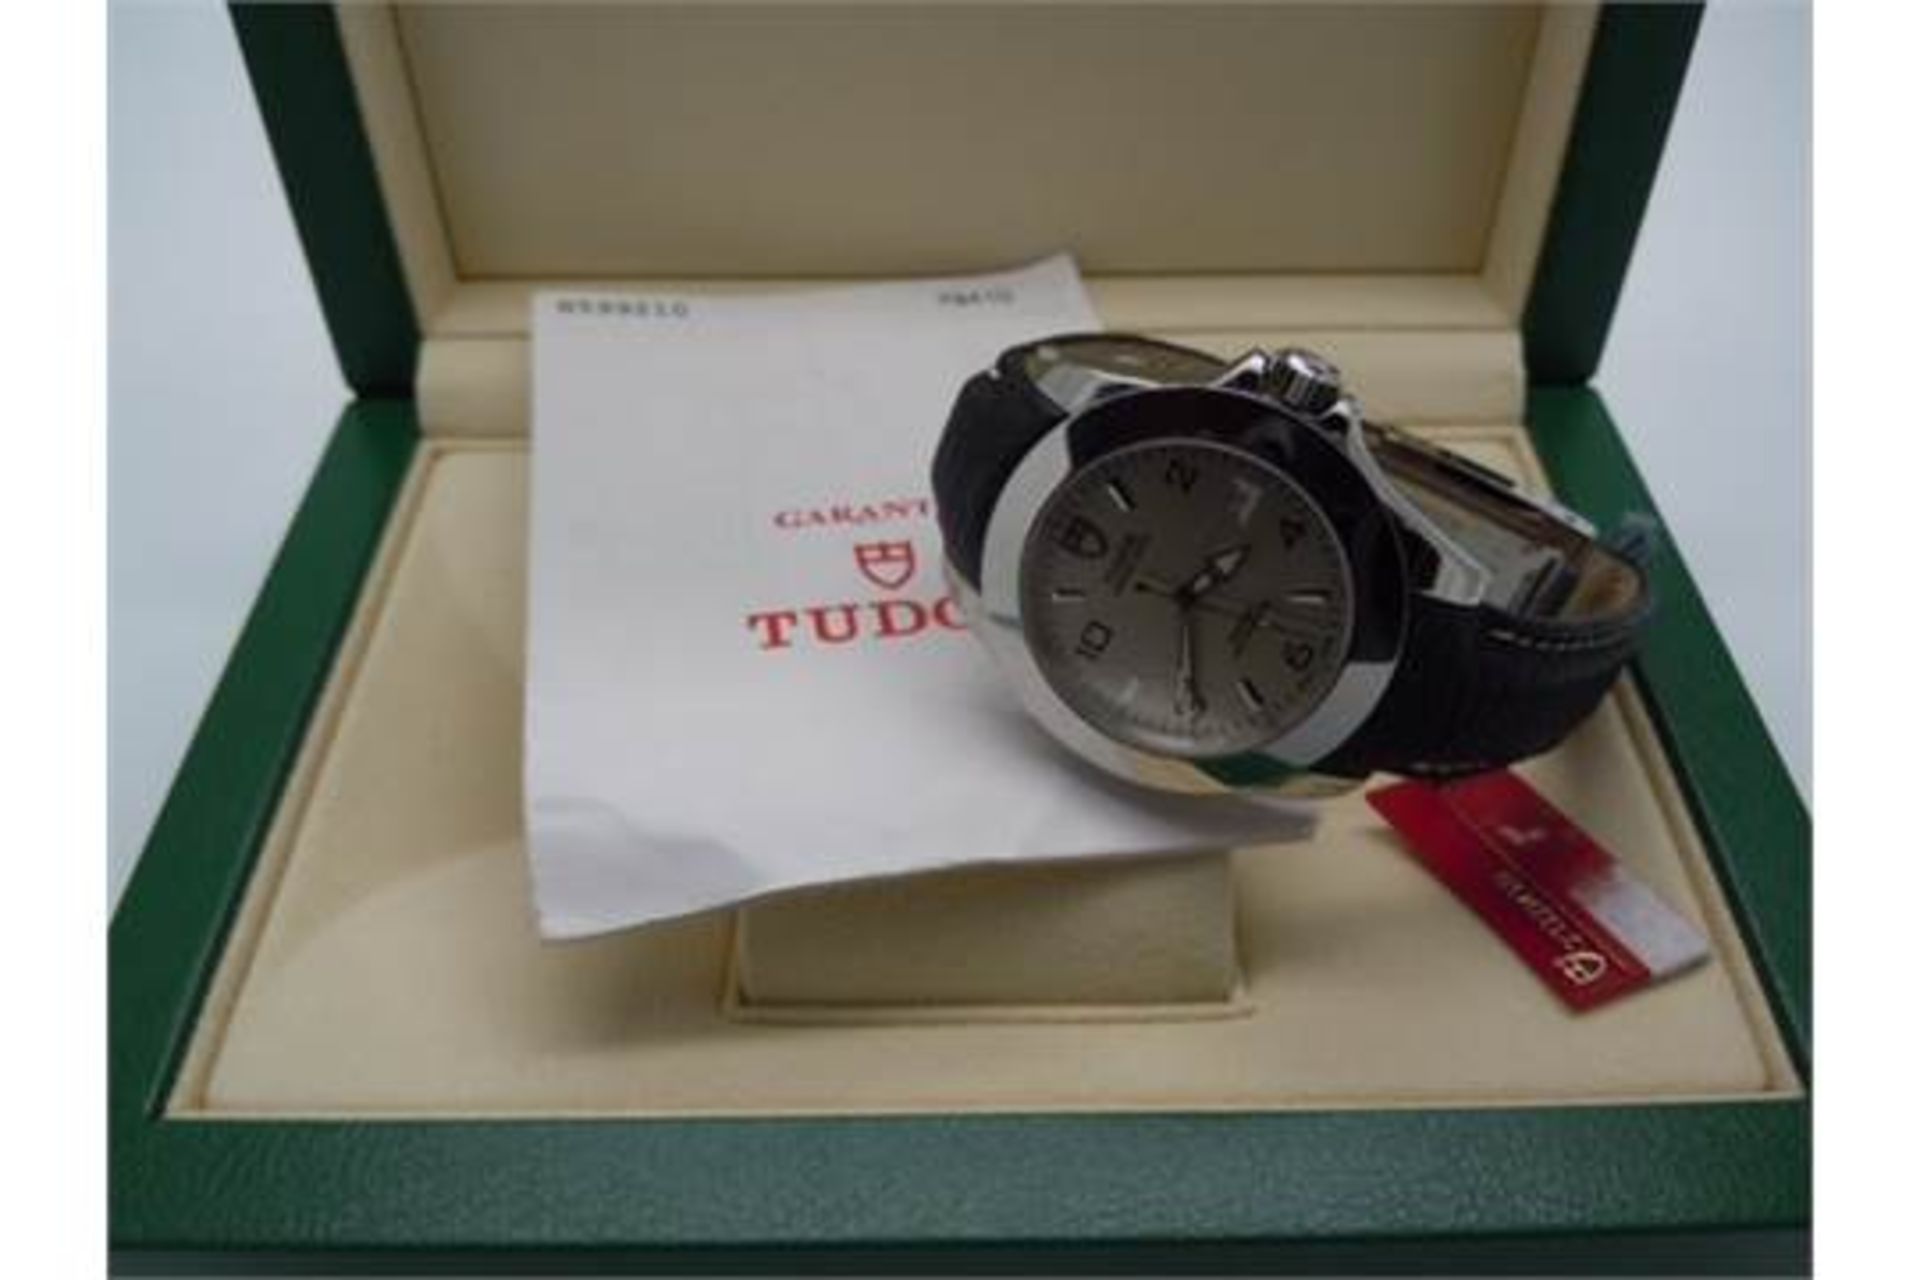 BRAND NEW OLD STOCK TUDOR PRINCE DATE ROTOR SELF WINDING WATCH STILL WITH STICKERS BOXED - Image 5 of 6